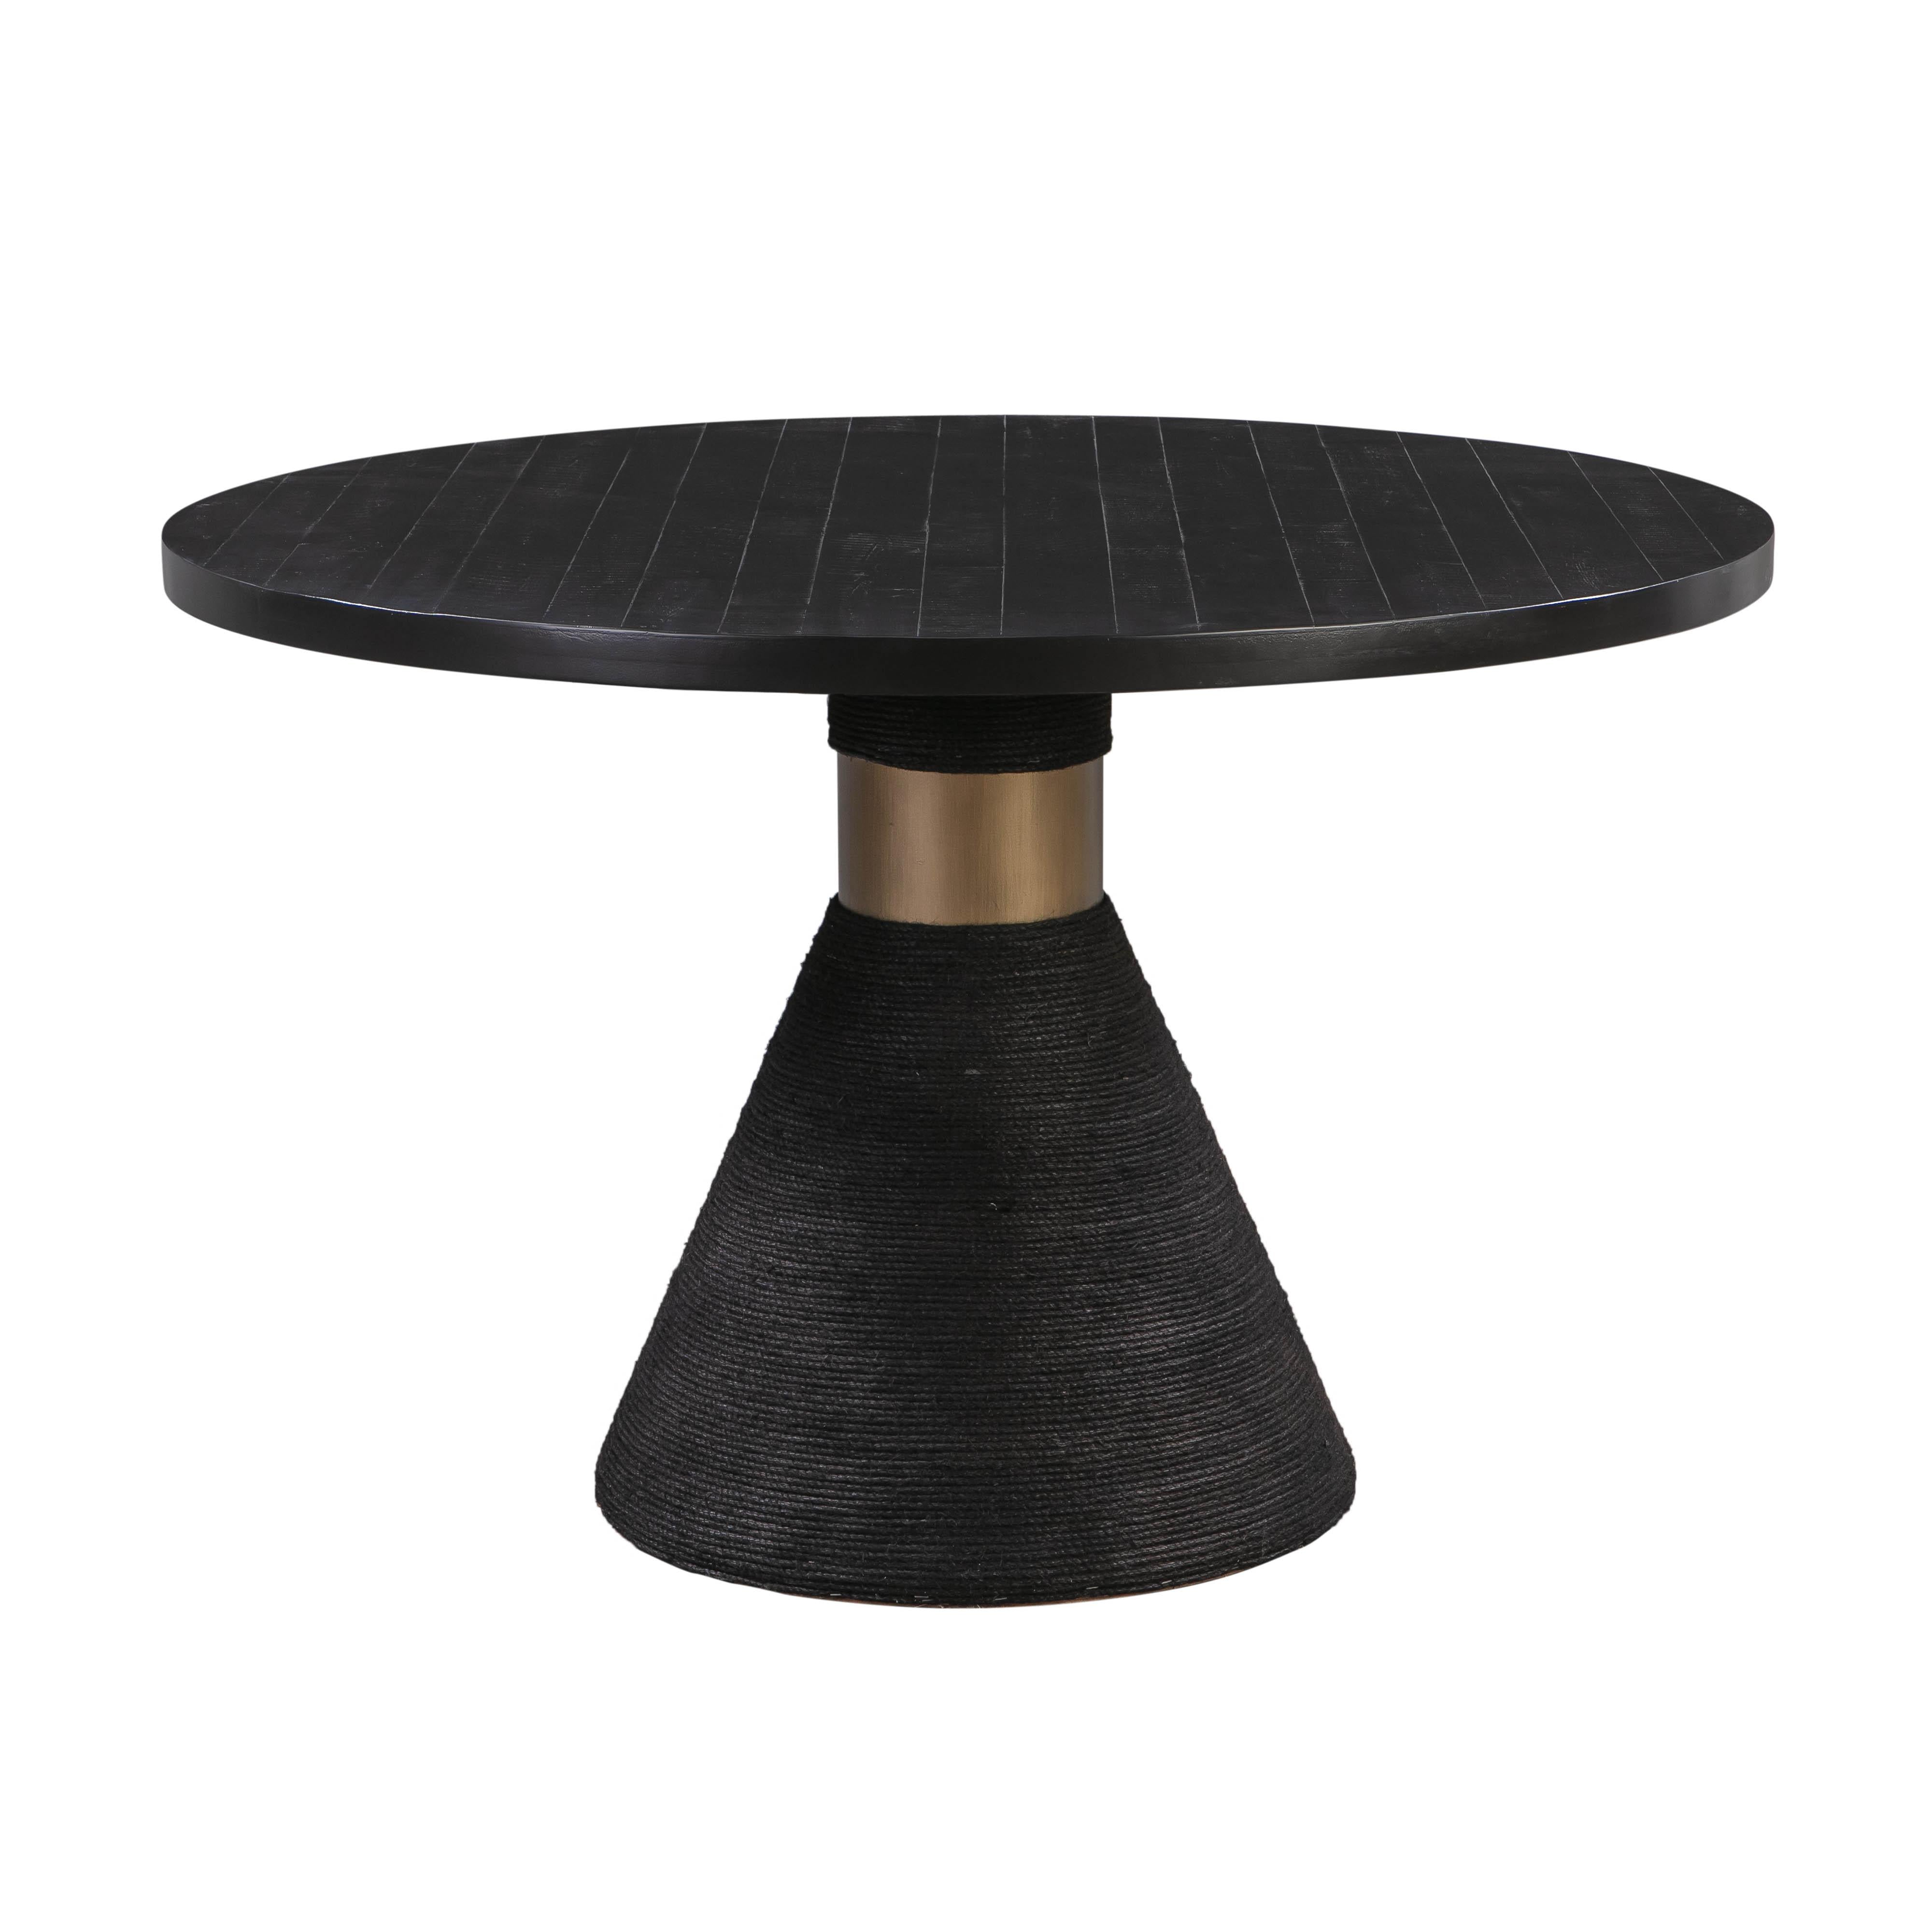 Tov Furniture Dining Tables - Rishi Black Rope Round Table